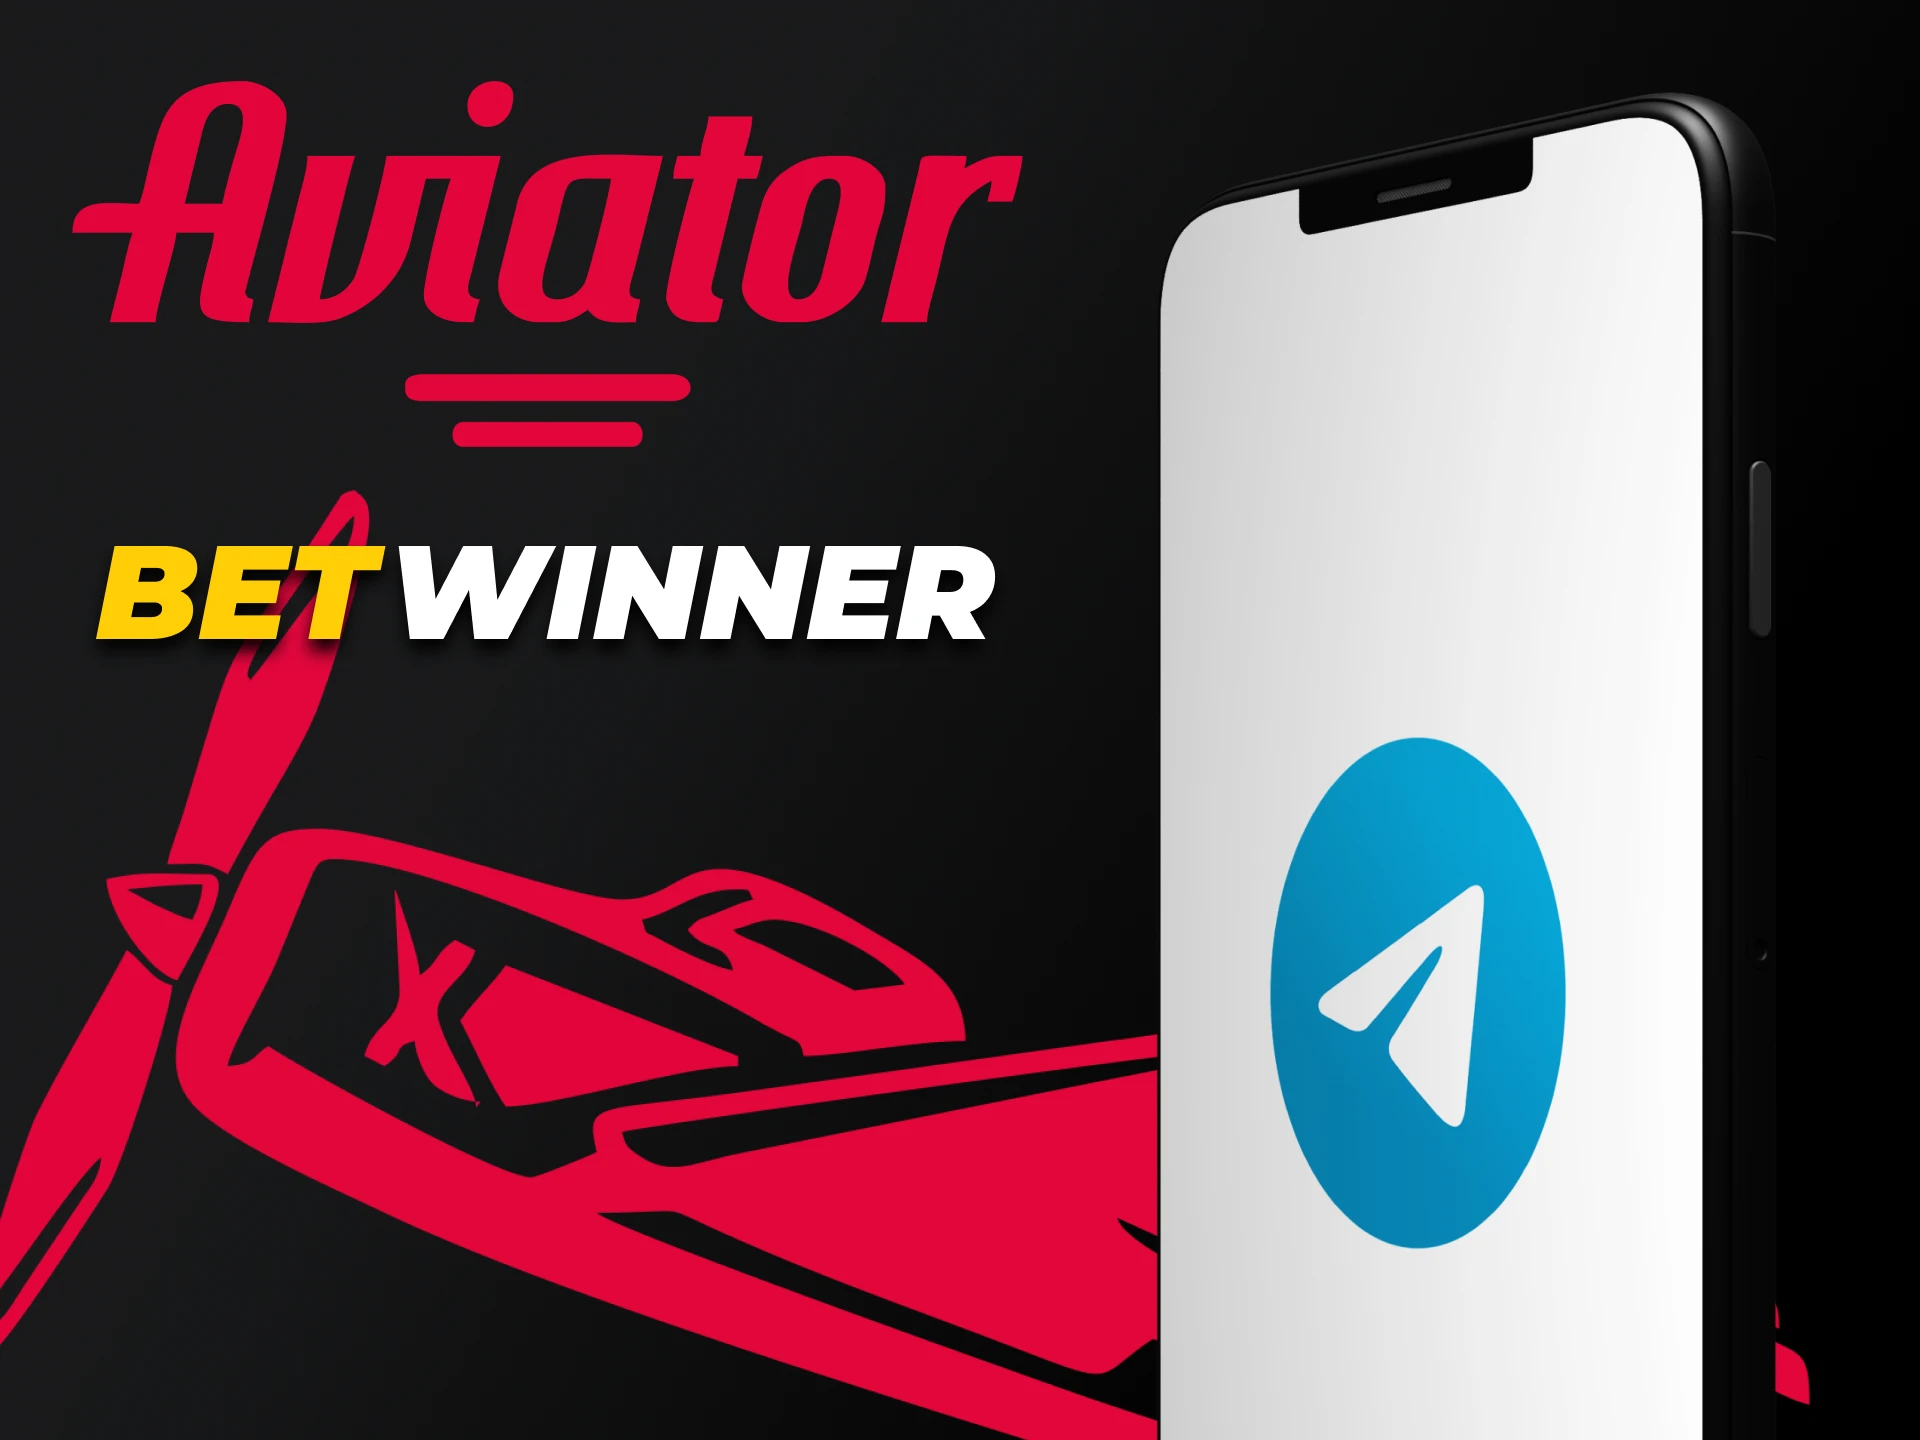 To play Aviator, you can use third-party winning programs from Betwinner.